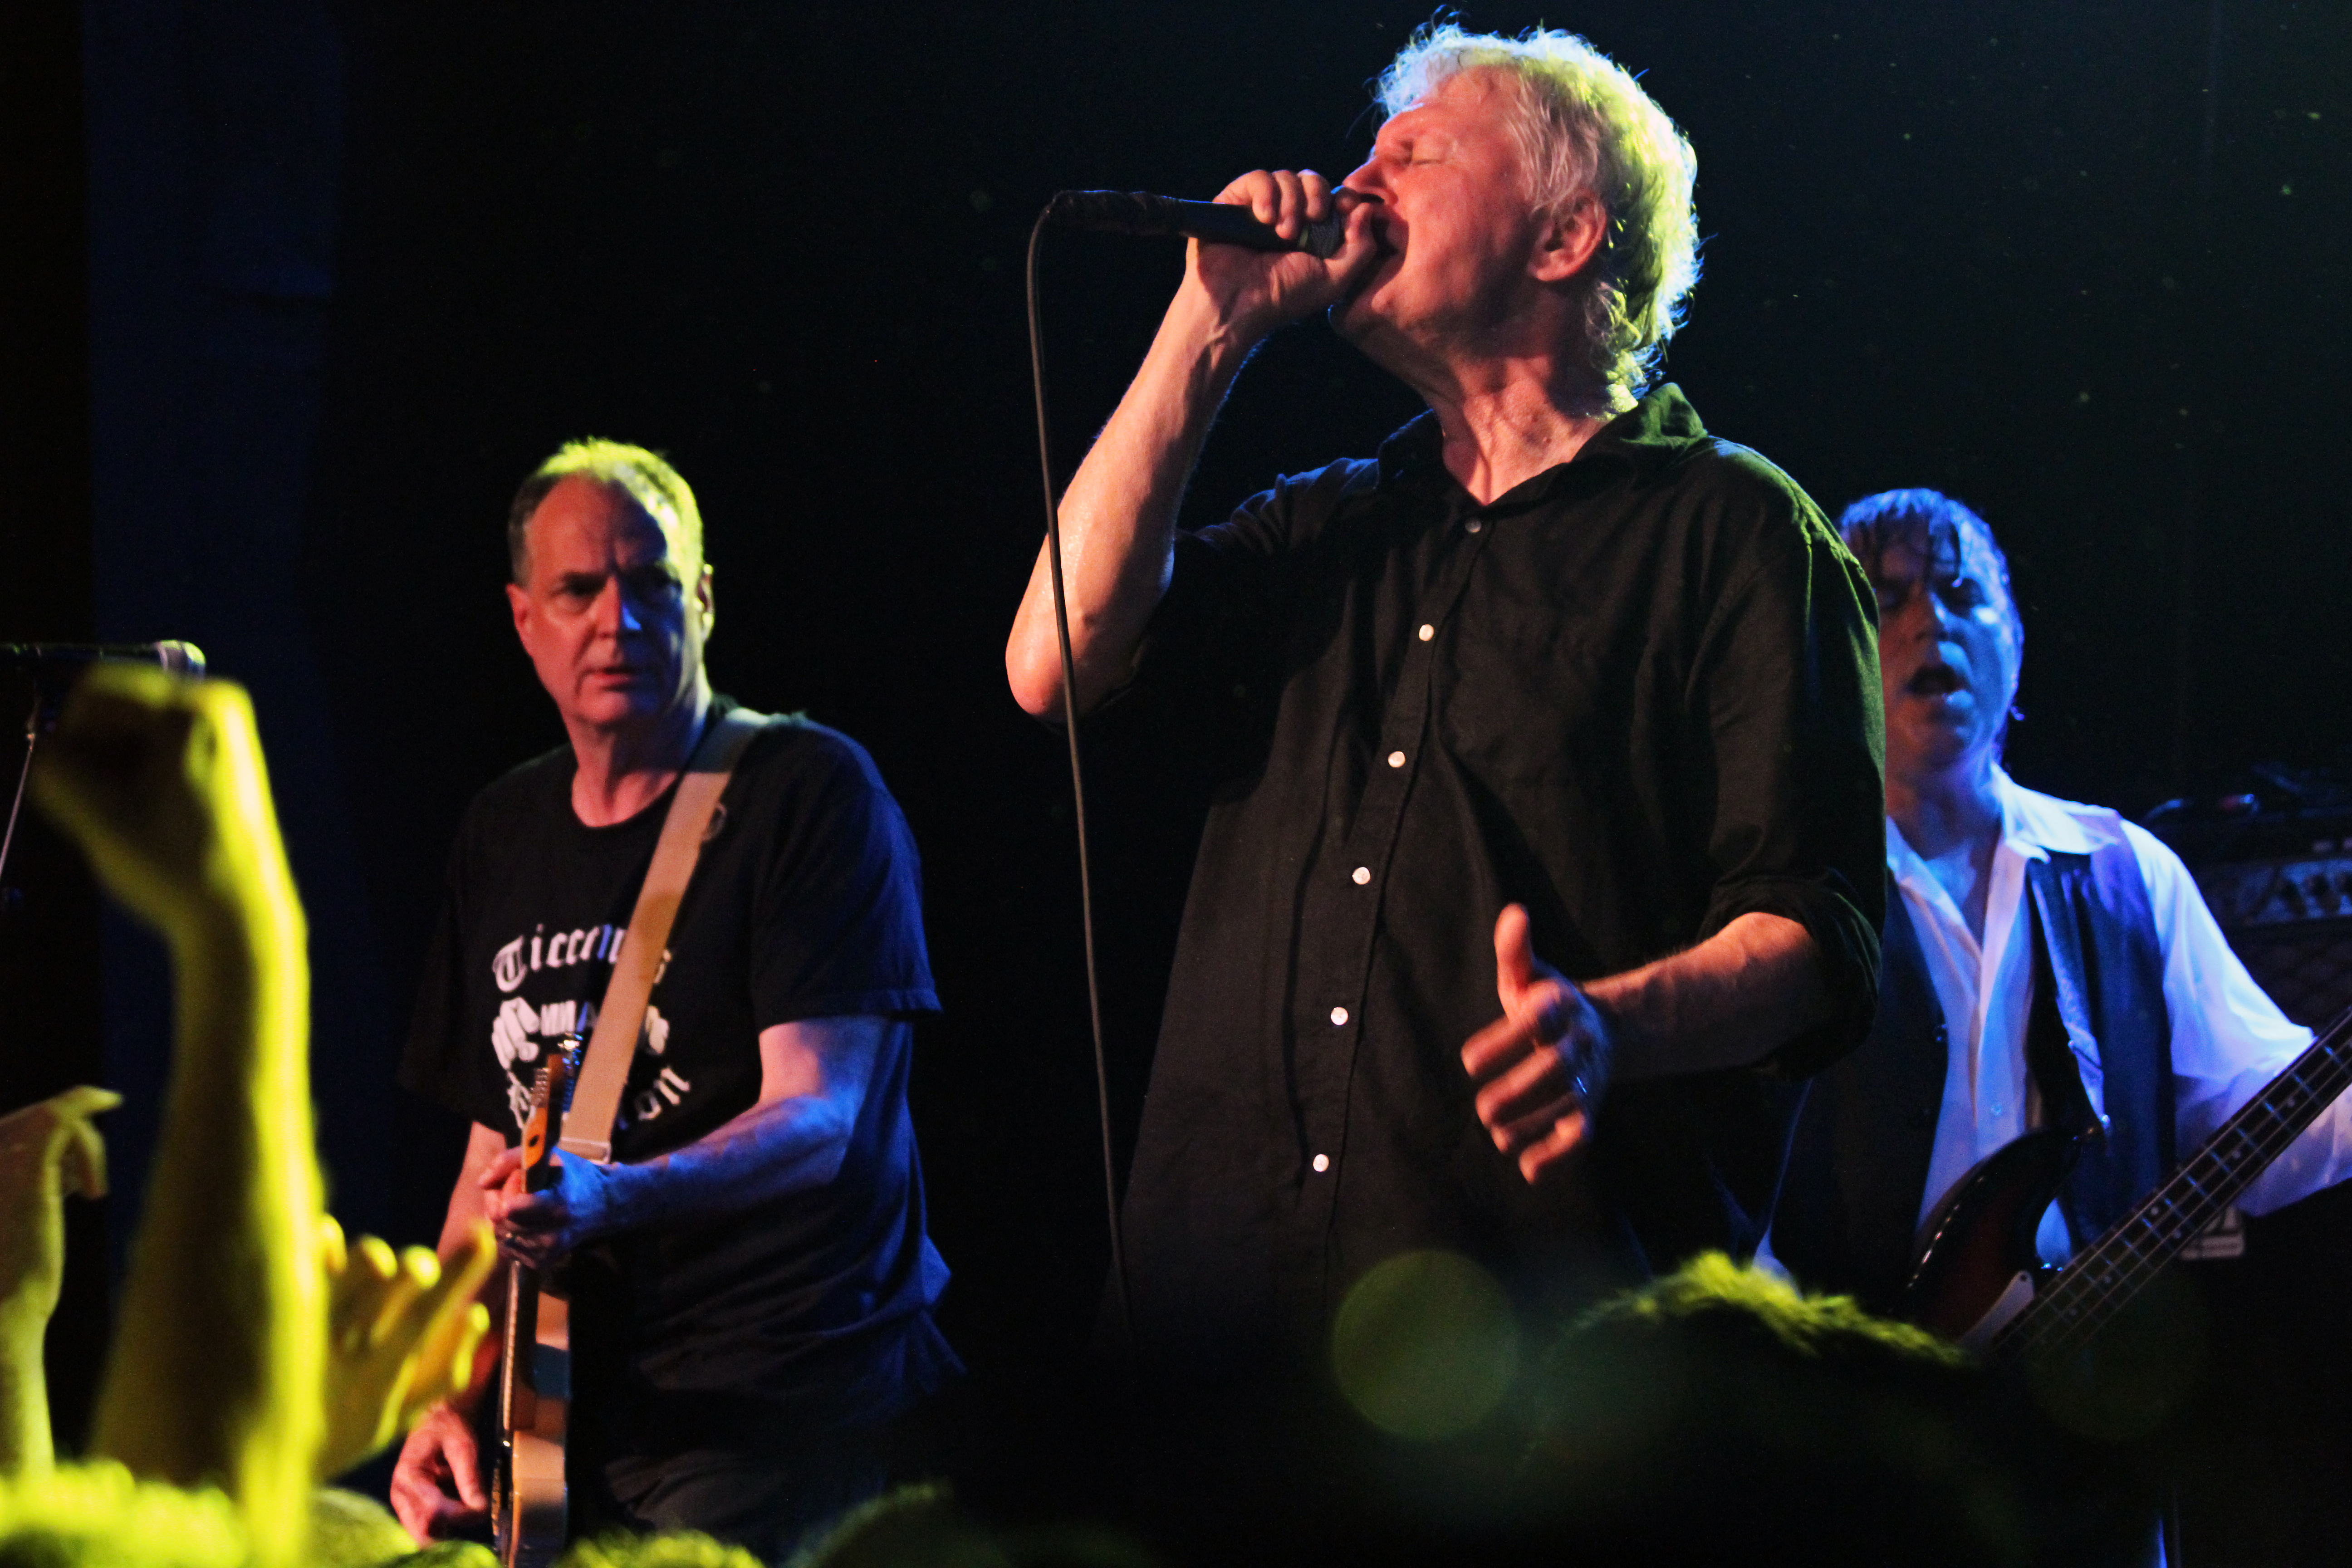 Guided by voices concert - focus on the lead singer